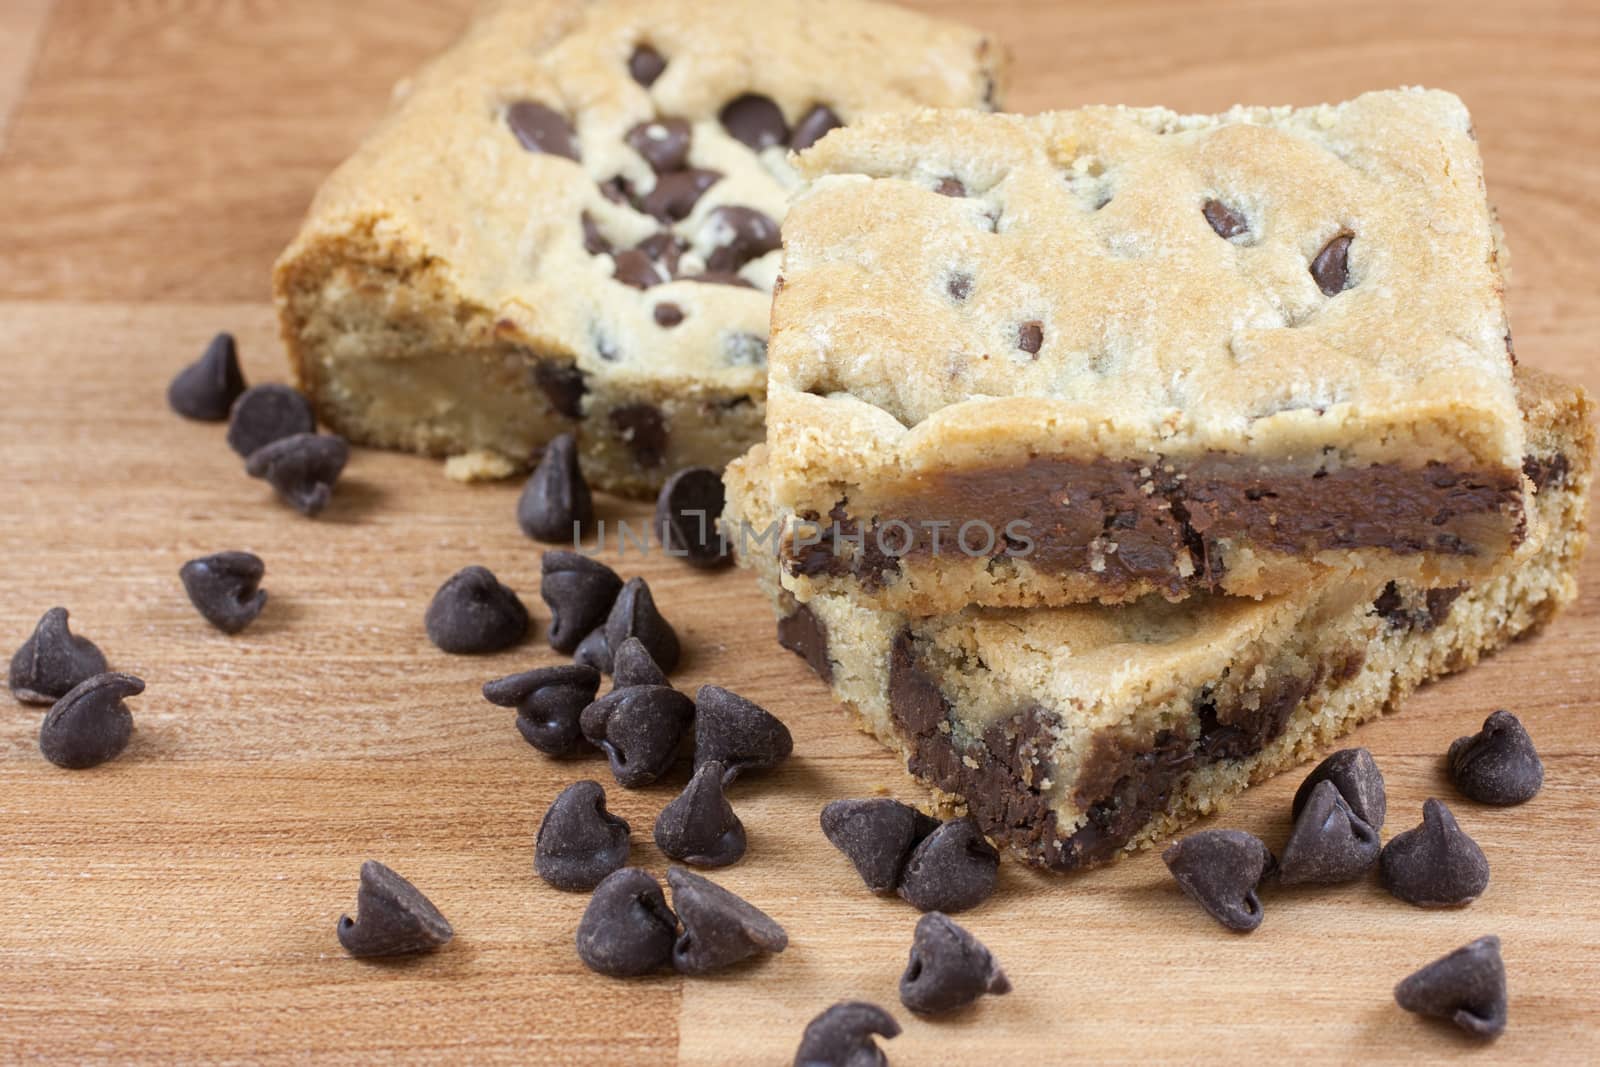 Chocolate Chip Cookie Bars by SouthernLightStudios